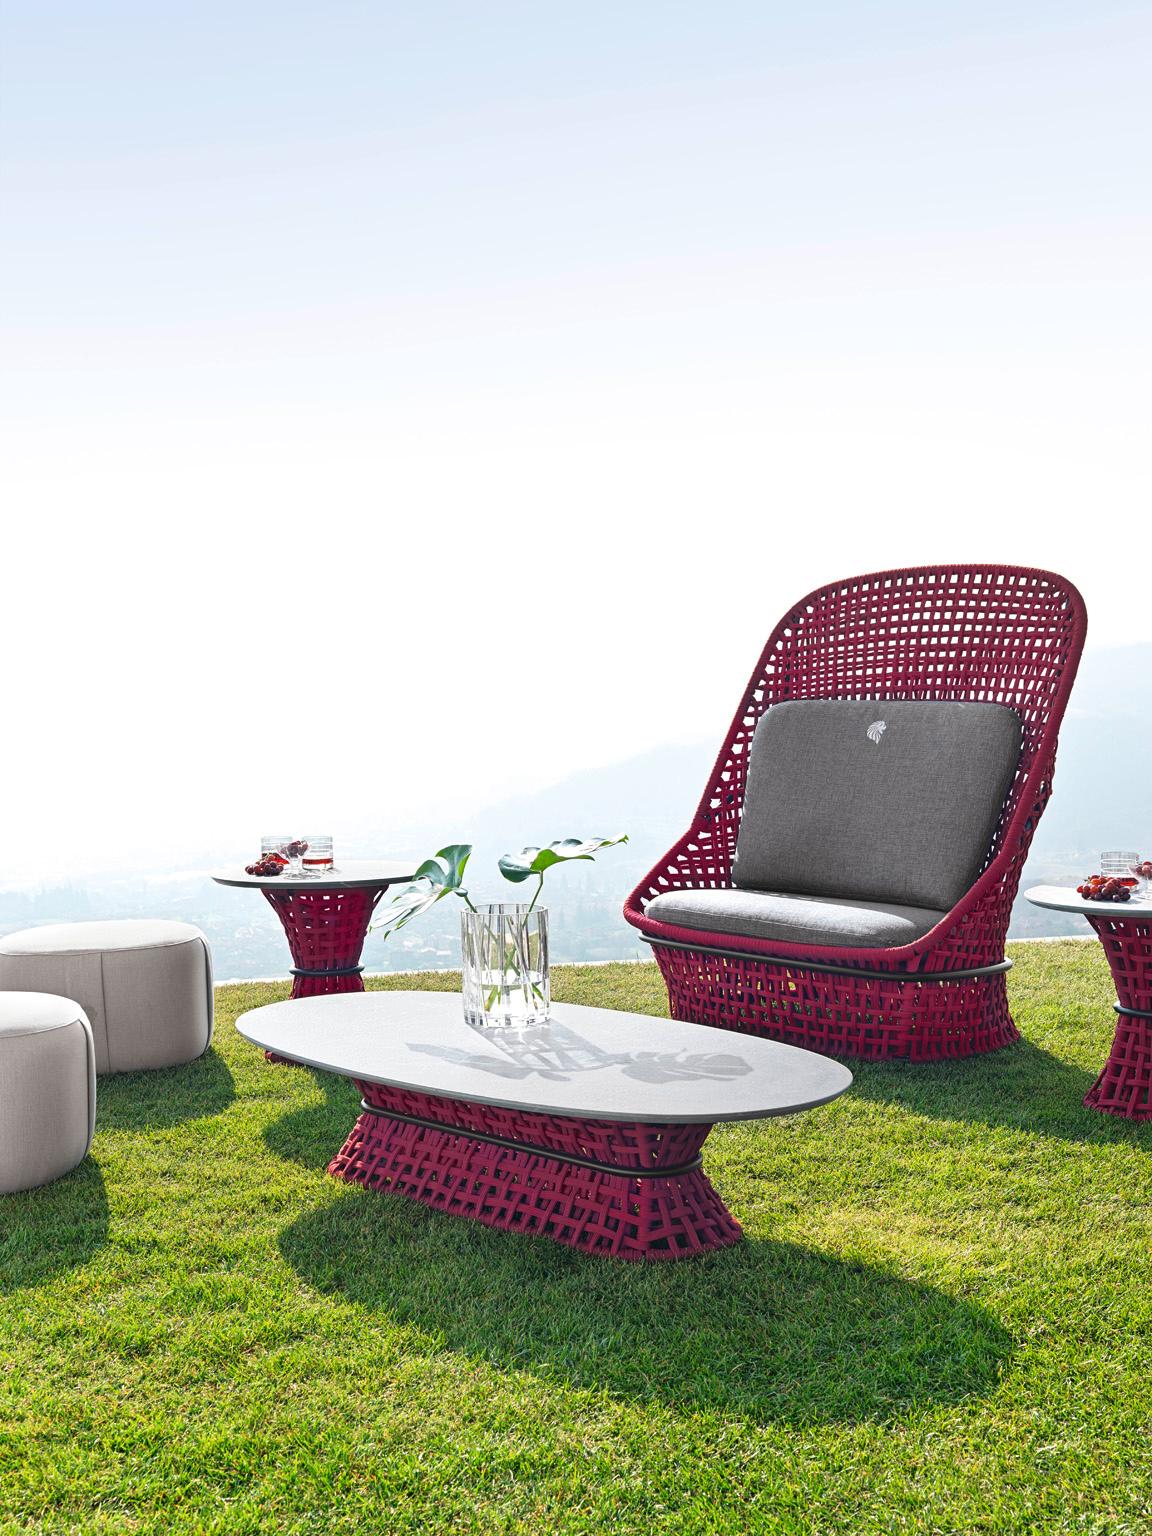 Giorgio Collection Dune Outdoor High Back occasional chair in special treated fabric. Cushion filling in waterproof dacron. Structure in combination of satined black metal treated in cataphoresis with inserted Giorgio Collection logo and Amaranth